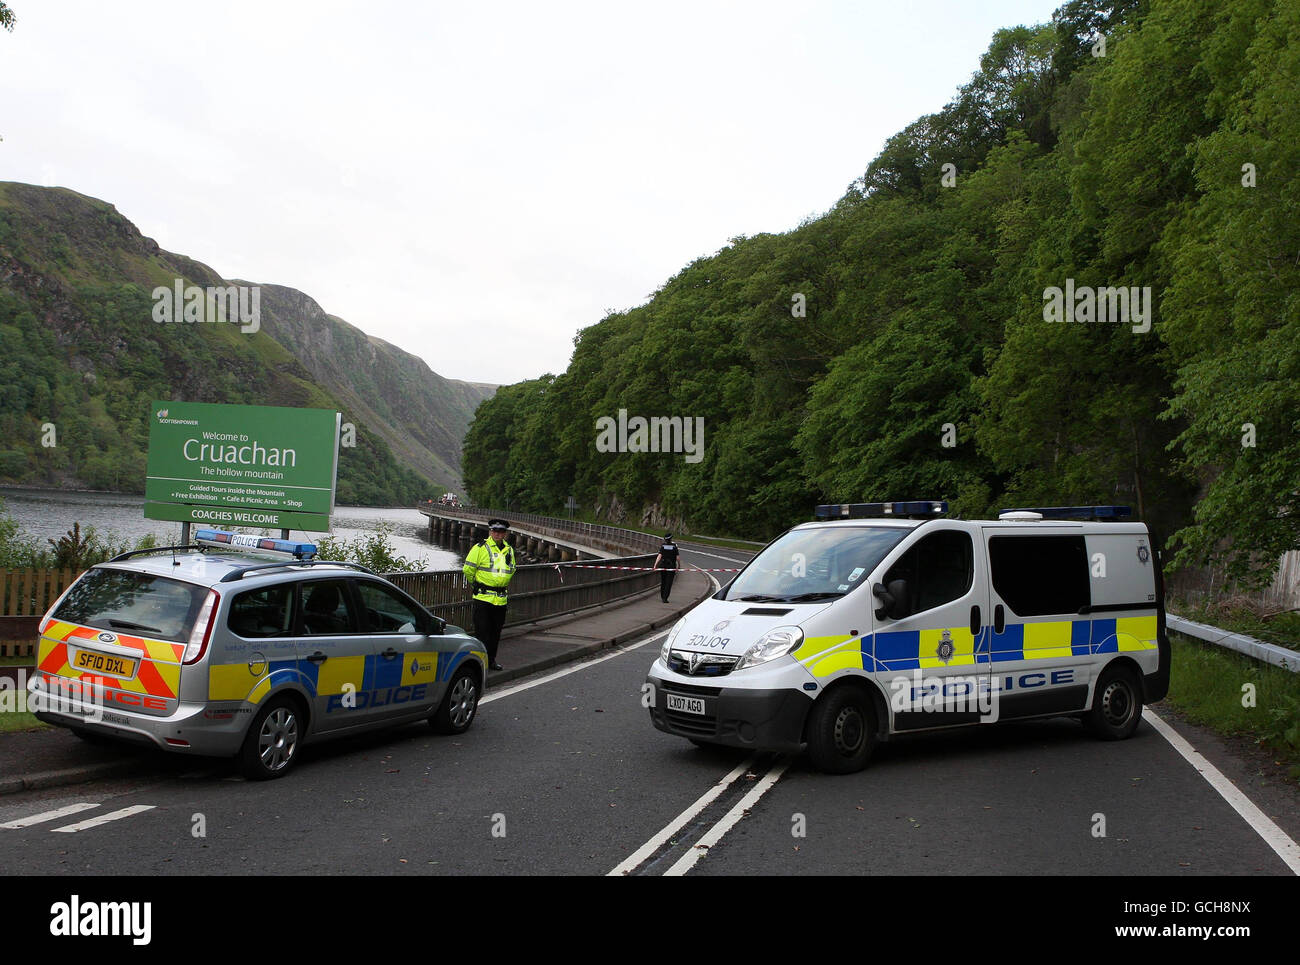 A police cordon close to the scene of a train train derailment near the Falls of Cruachan power station, by Loch Awe in Argyll. Eight people were taken to hospital after 6.20pm service from Glasgow to Oban derailed and caught fire. Stock Photo